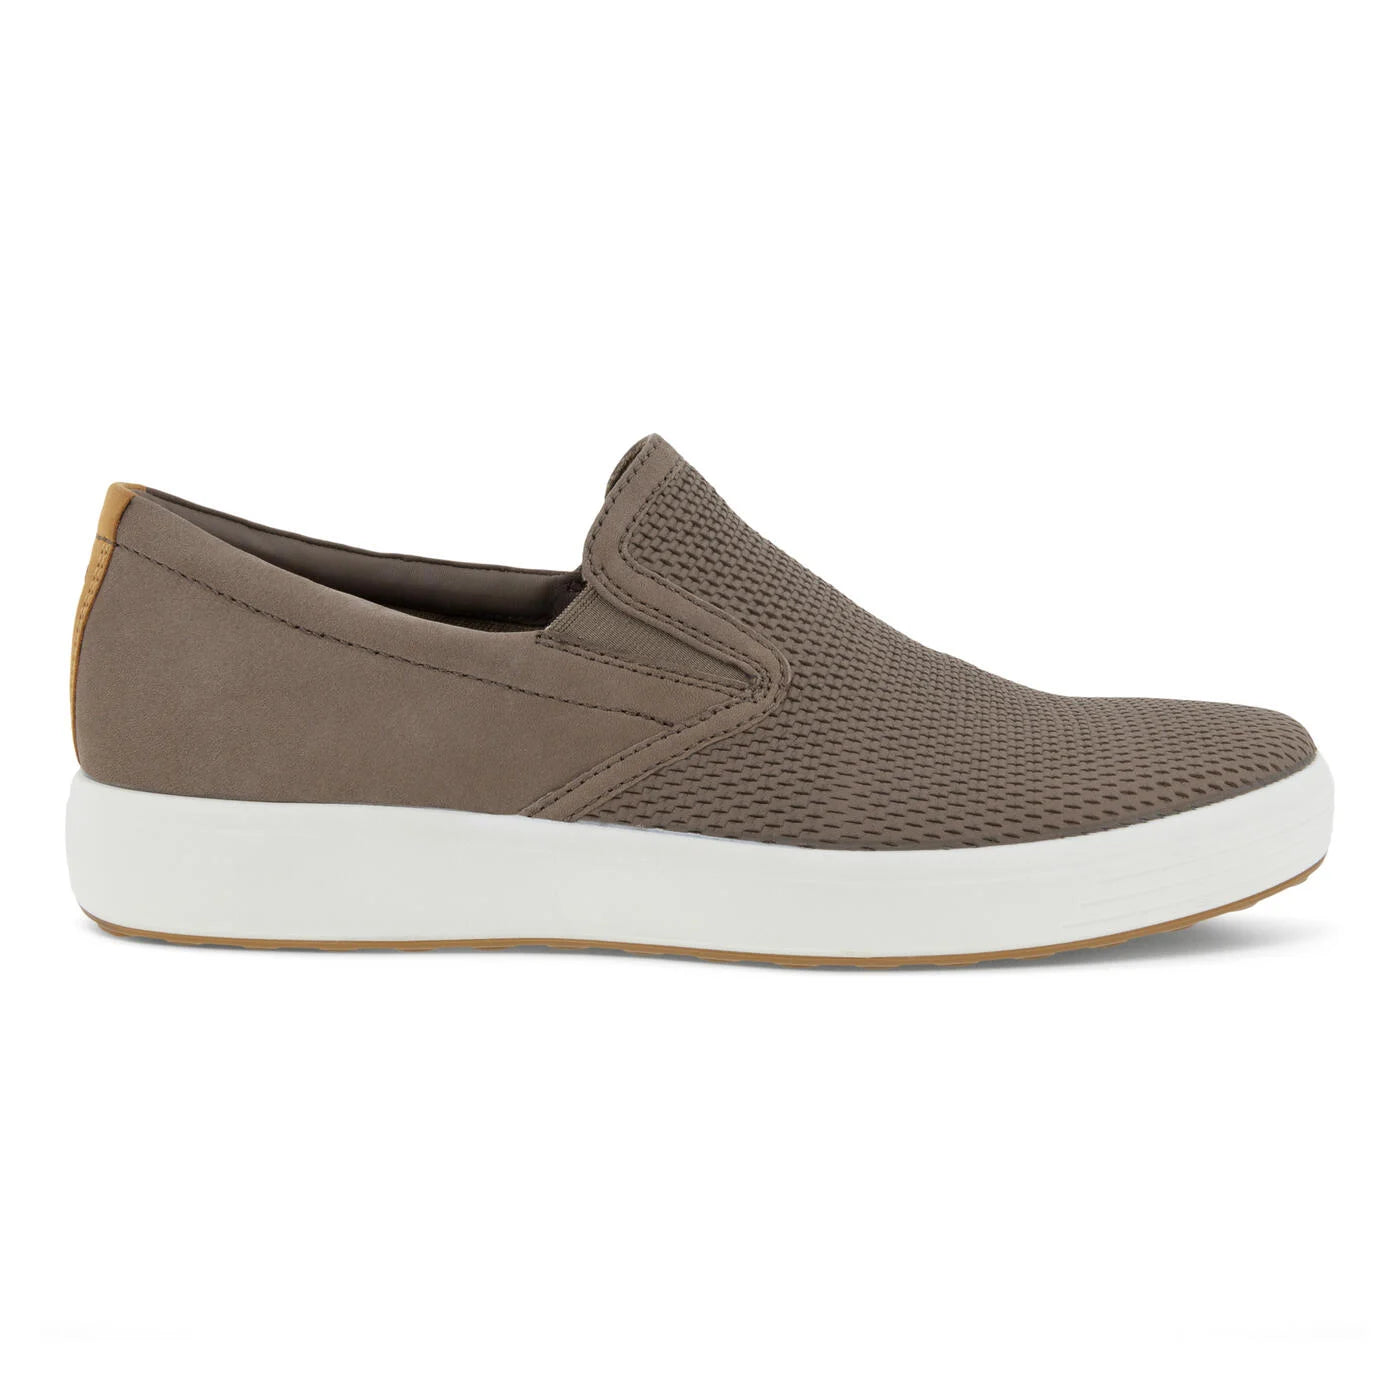 ECCO Men's Soft 7 Slip-On Sneakers Taupe